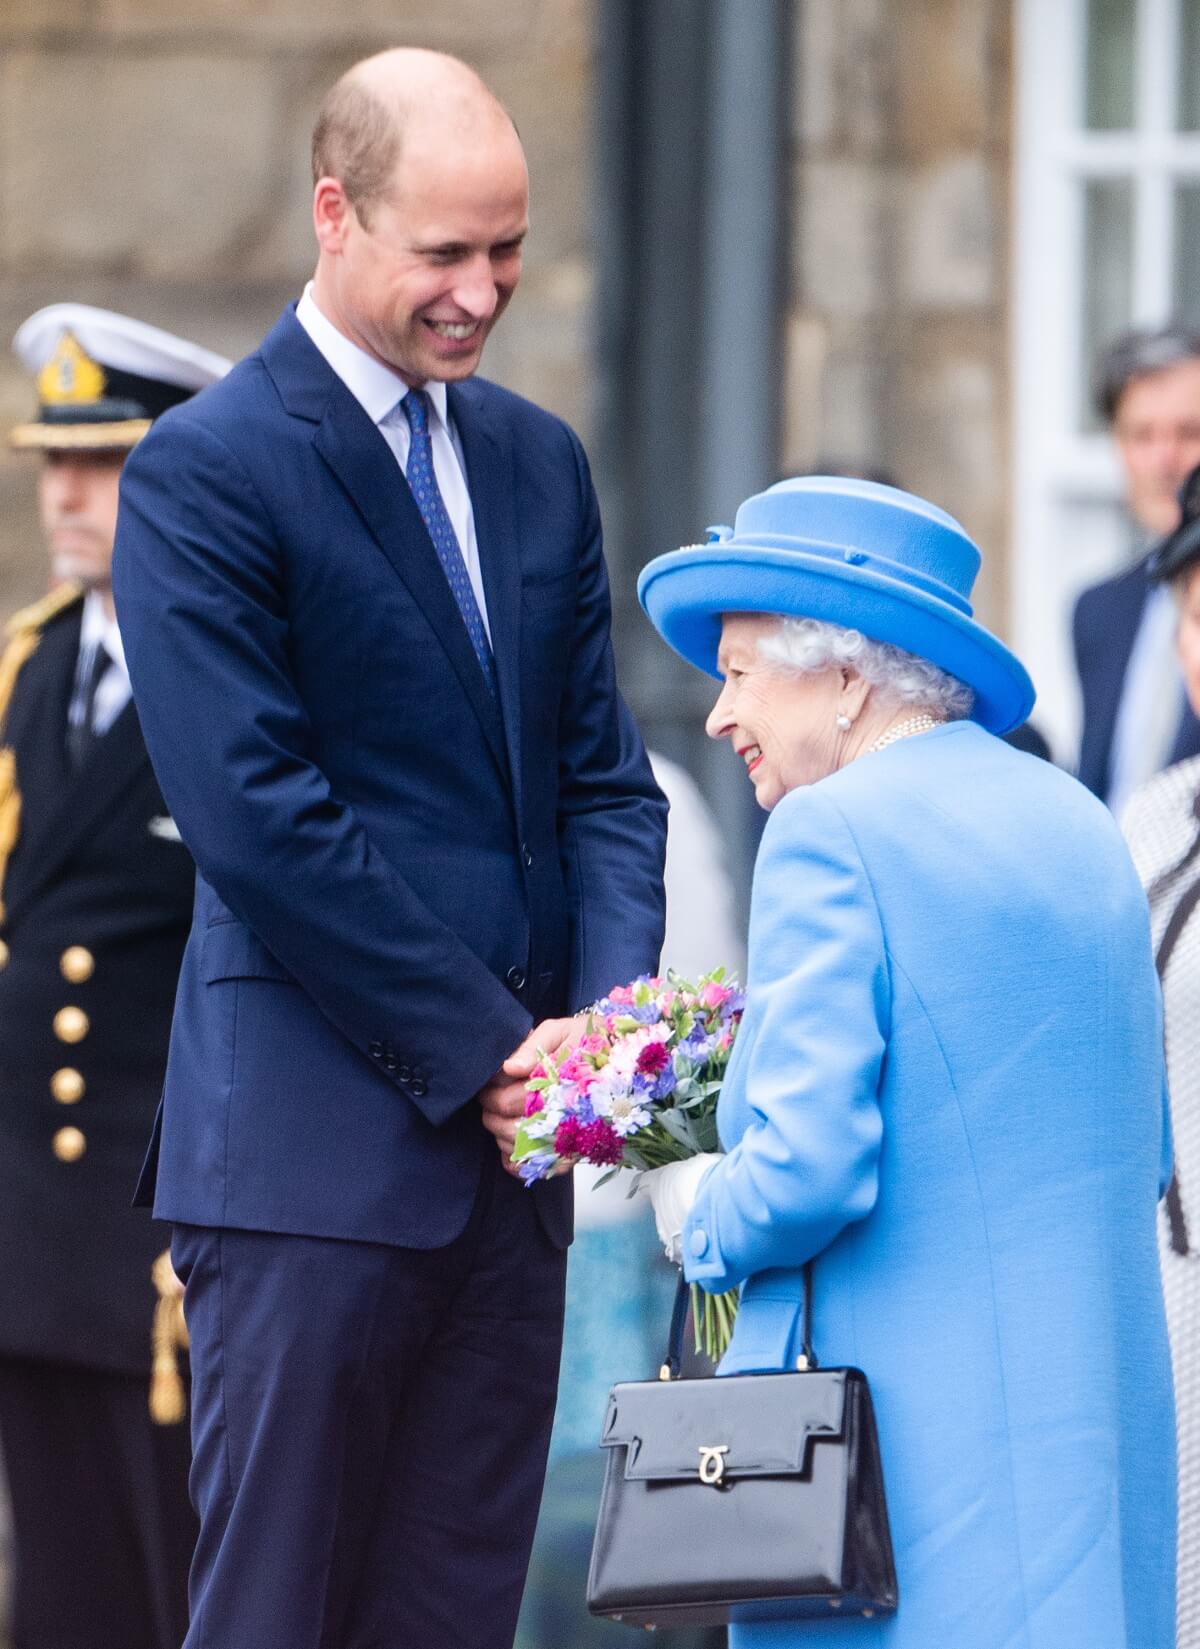 Queen Elizabeth II and Prince William attend The Ceremony of the Keys at The Palace Of Holyroodhouse in Scotland